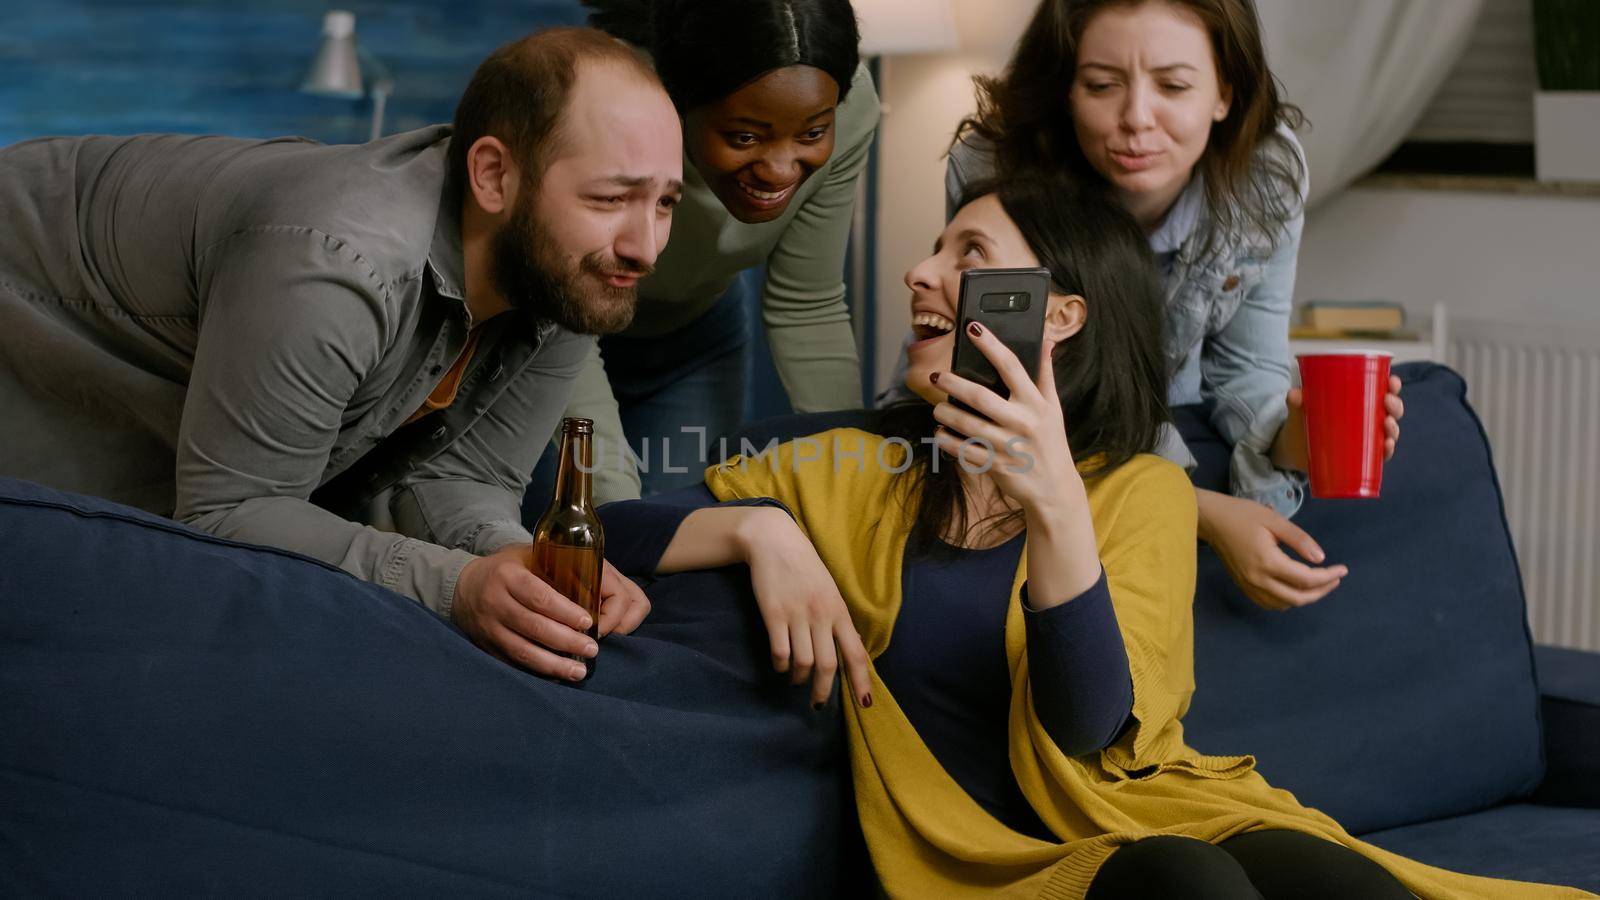 Group of mixed race people spending time together while looking at comedy video on phone. Group of mixed race people sitting on sofa, drinking beer, chilling in living room late at night